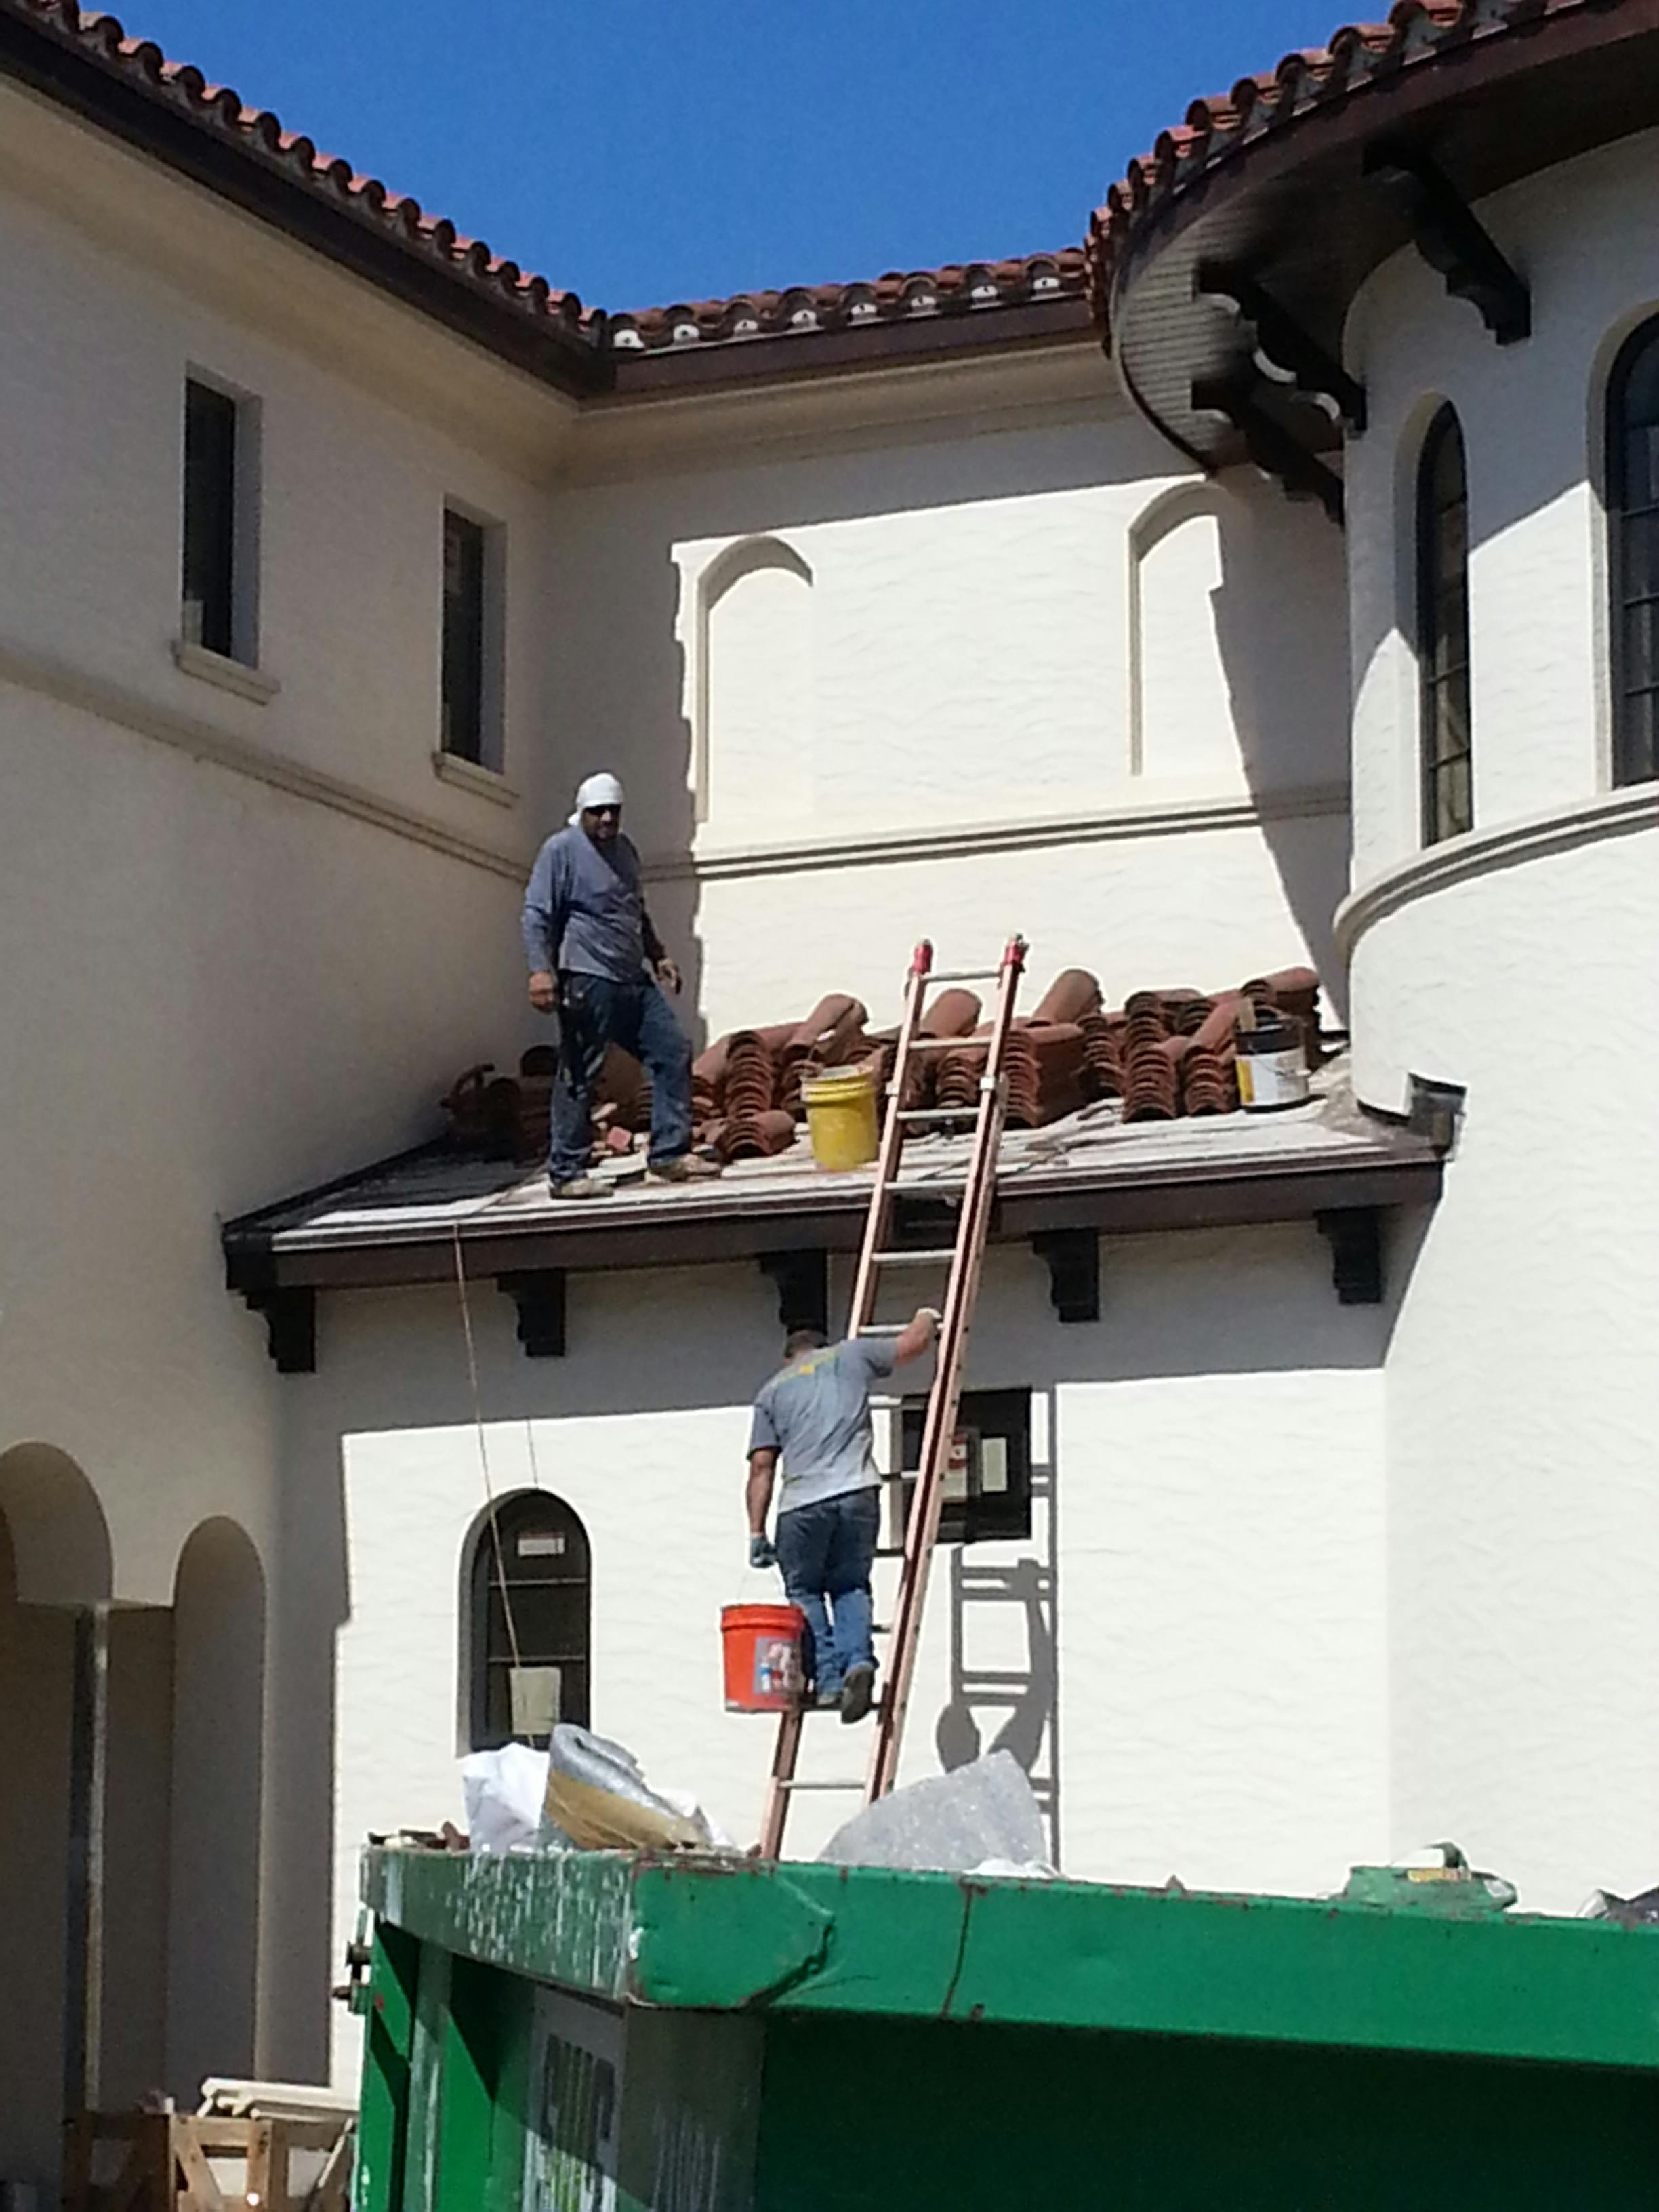 Free stock photo of improper use of a ladder, Roofers on roof without fall protection